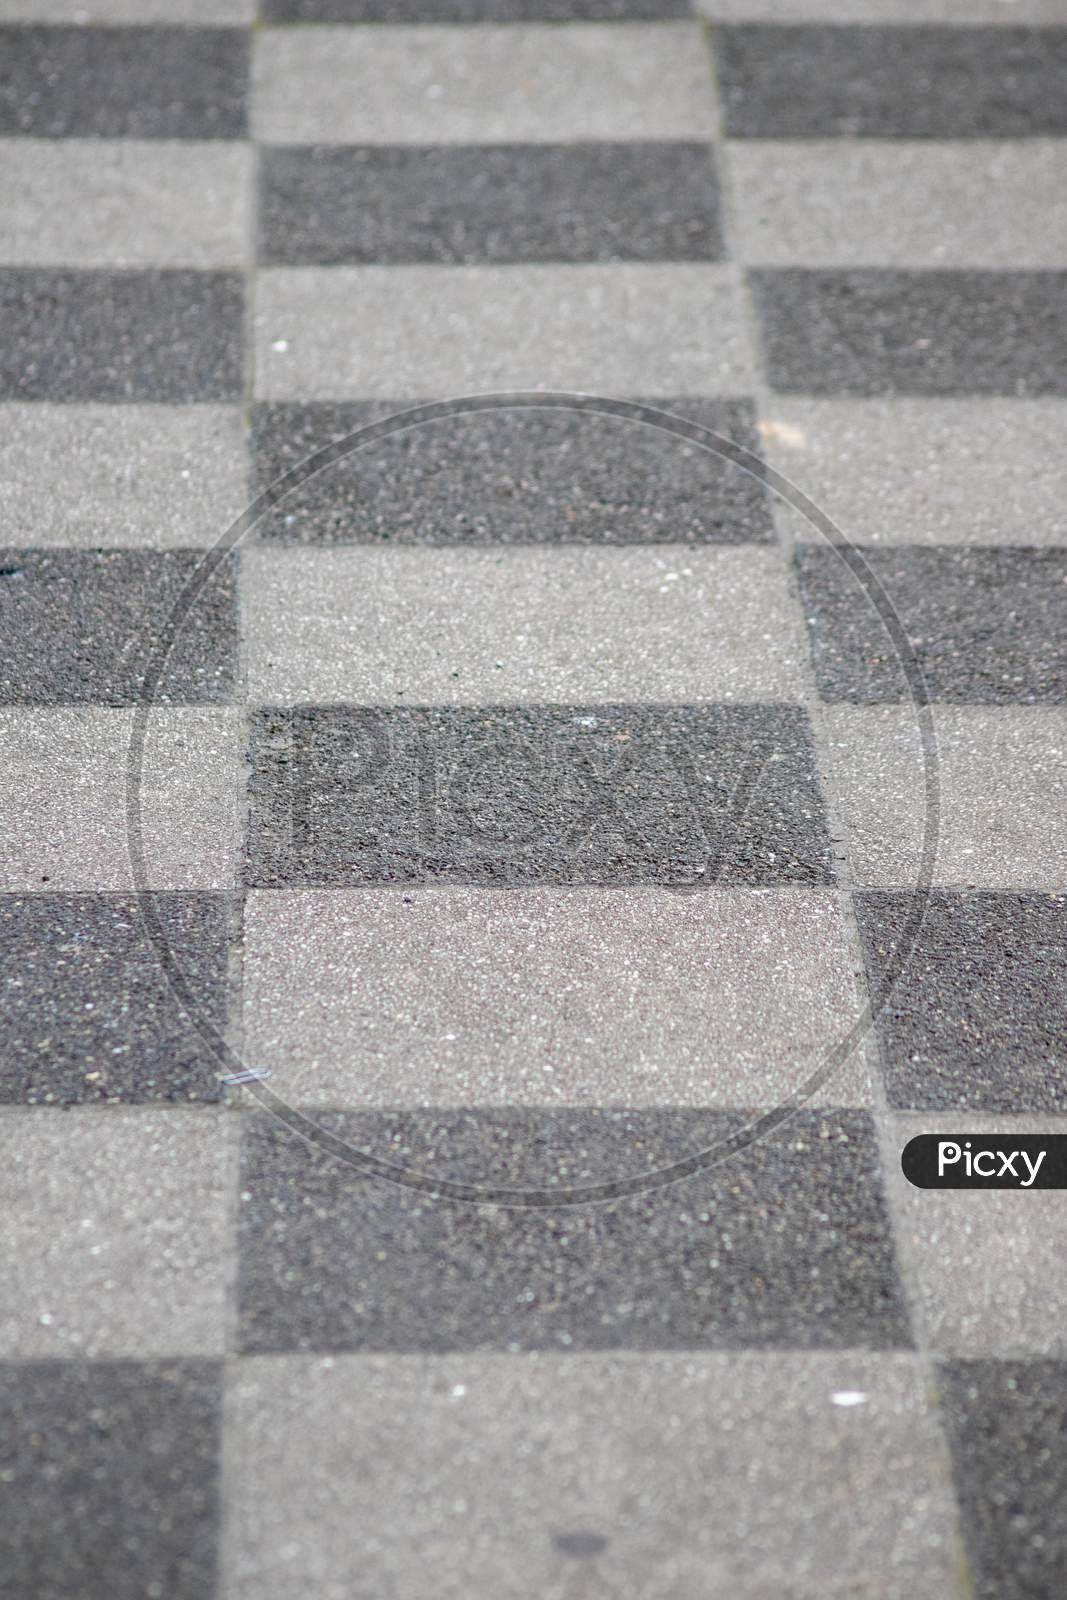 Chessboard pattern in waiting area on sidewalk pavement shows black and white checkerboard texture in rhombuses and geometric shapes background with black tiles and white tiles classic design surface